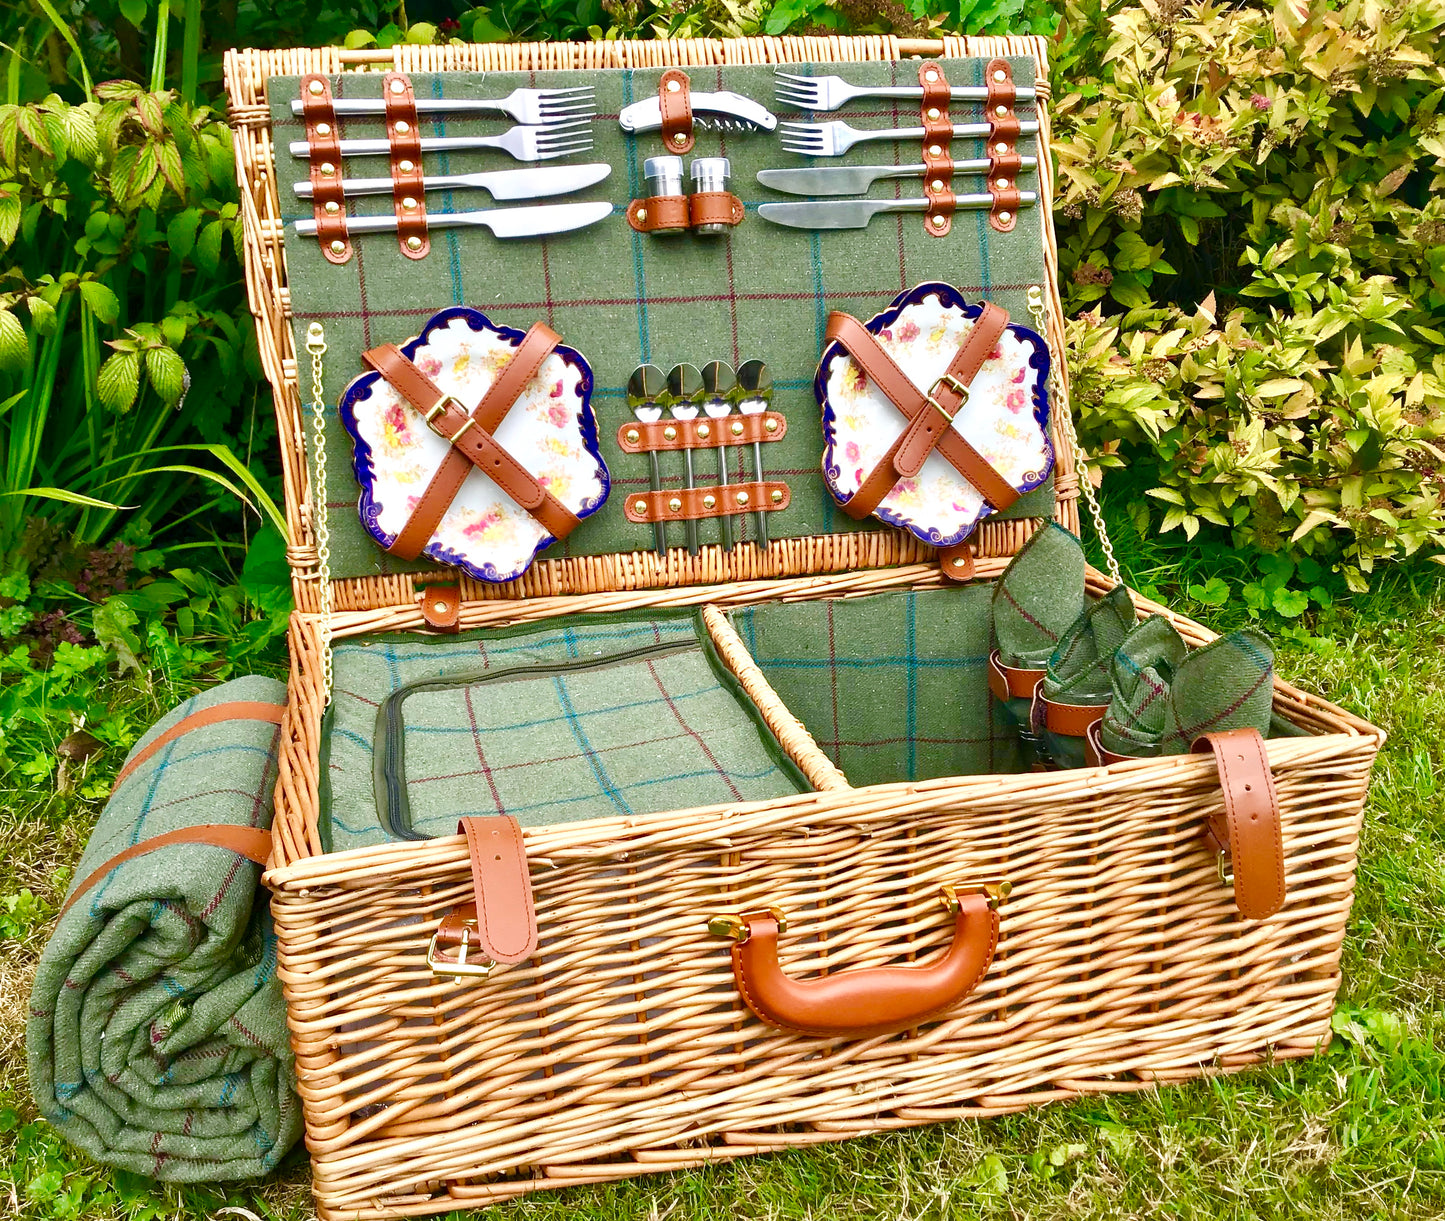 The Dorset - a leather and willow fitted picnic hamper for 4